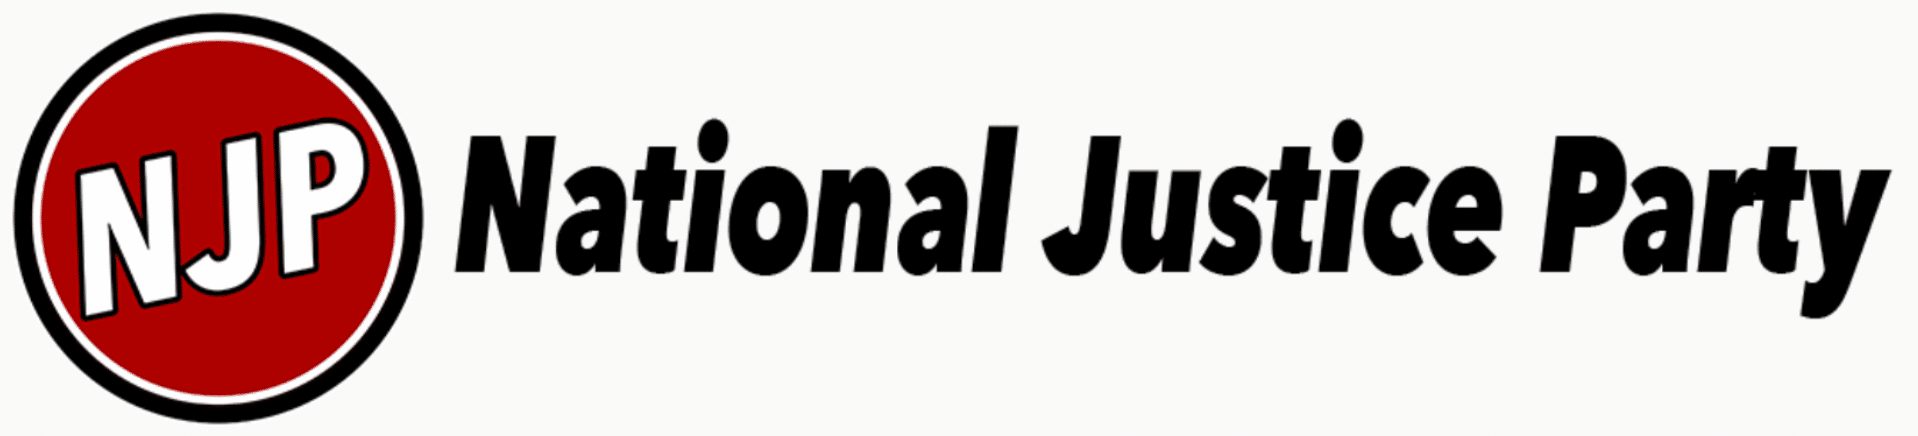 NATIONAL JUSTICE PARTY, RITTENHOUSE, TRIAL